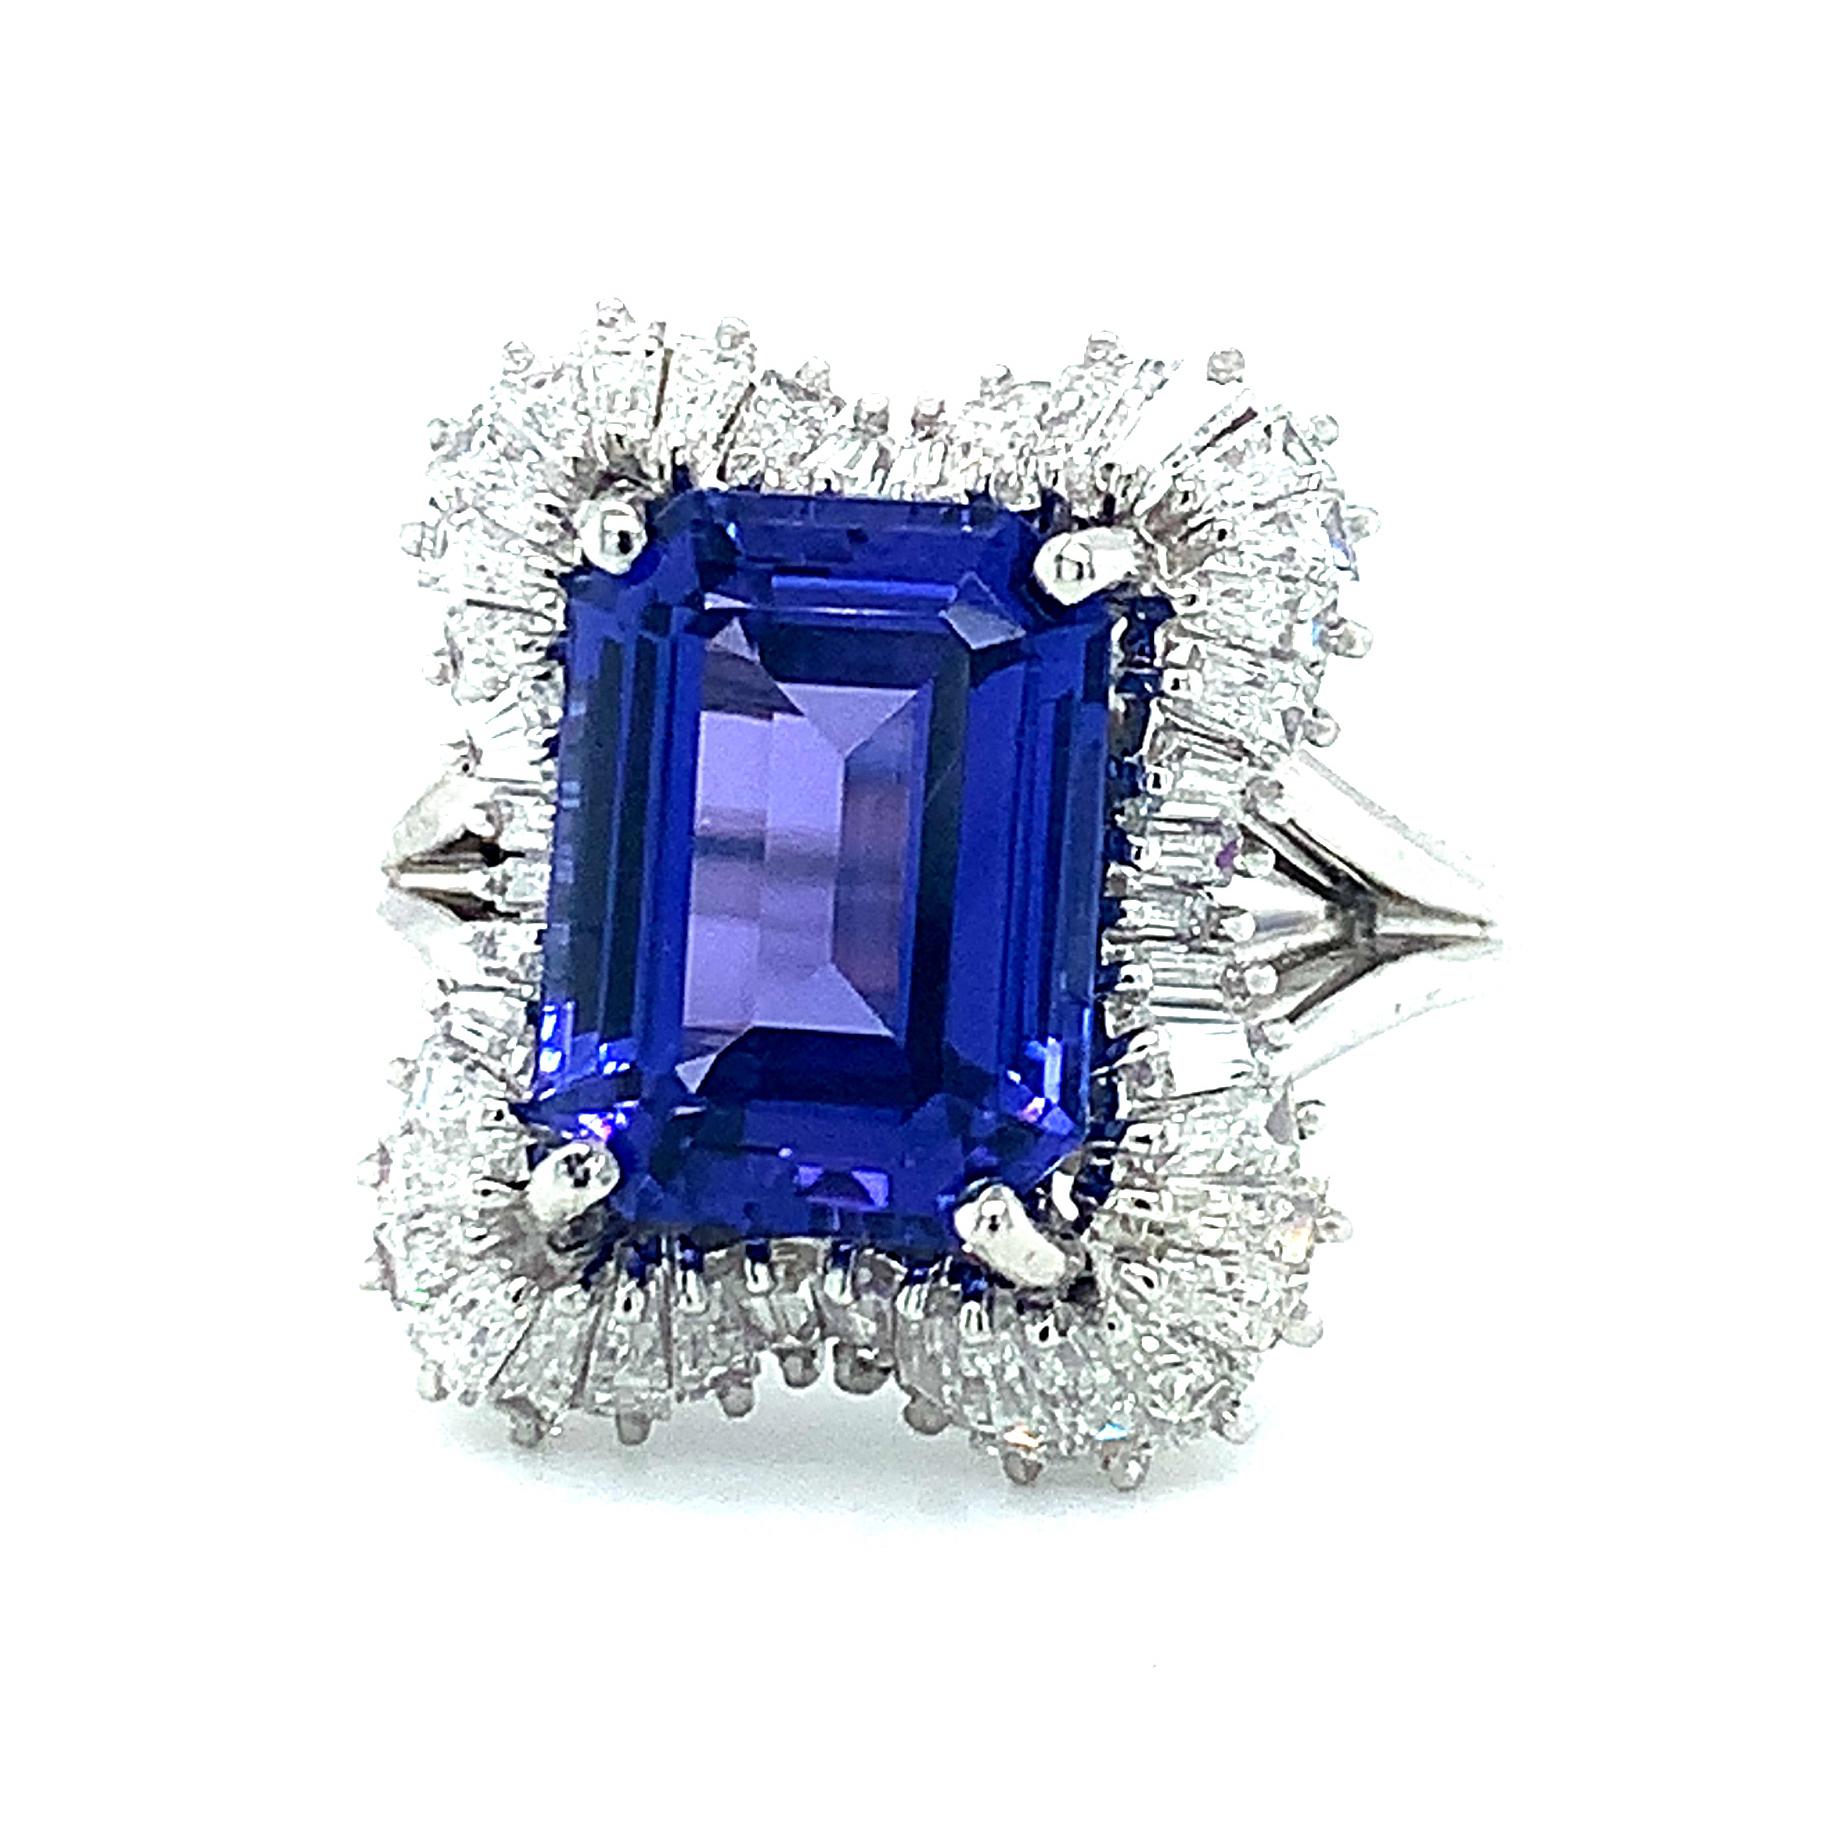 This stunning tanzanite and platinum ring is the one everyone will remember! The 4.89 carat emerald cut tanzanite literally sits center stage, framed by sparkling tapered baguette diamonds in this ever sparkling cocktail ring! The center stone has